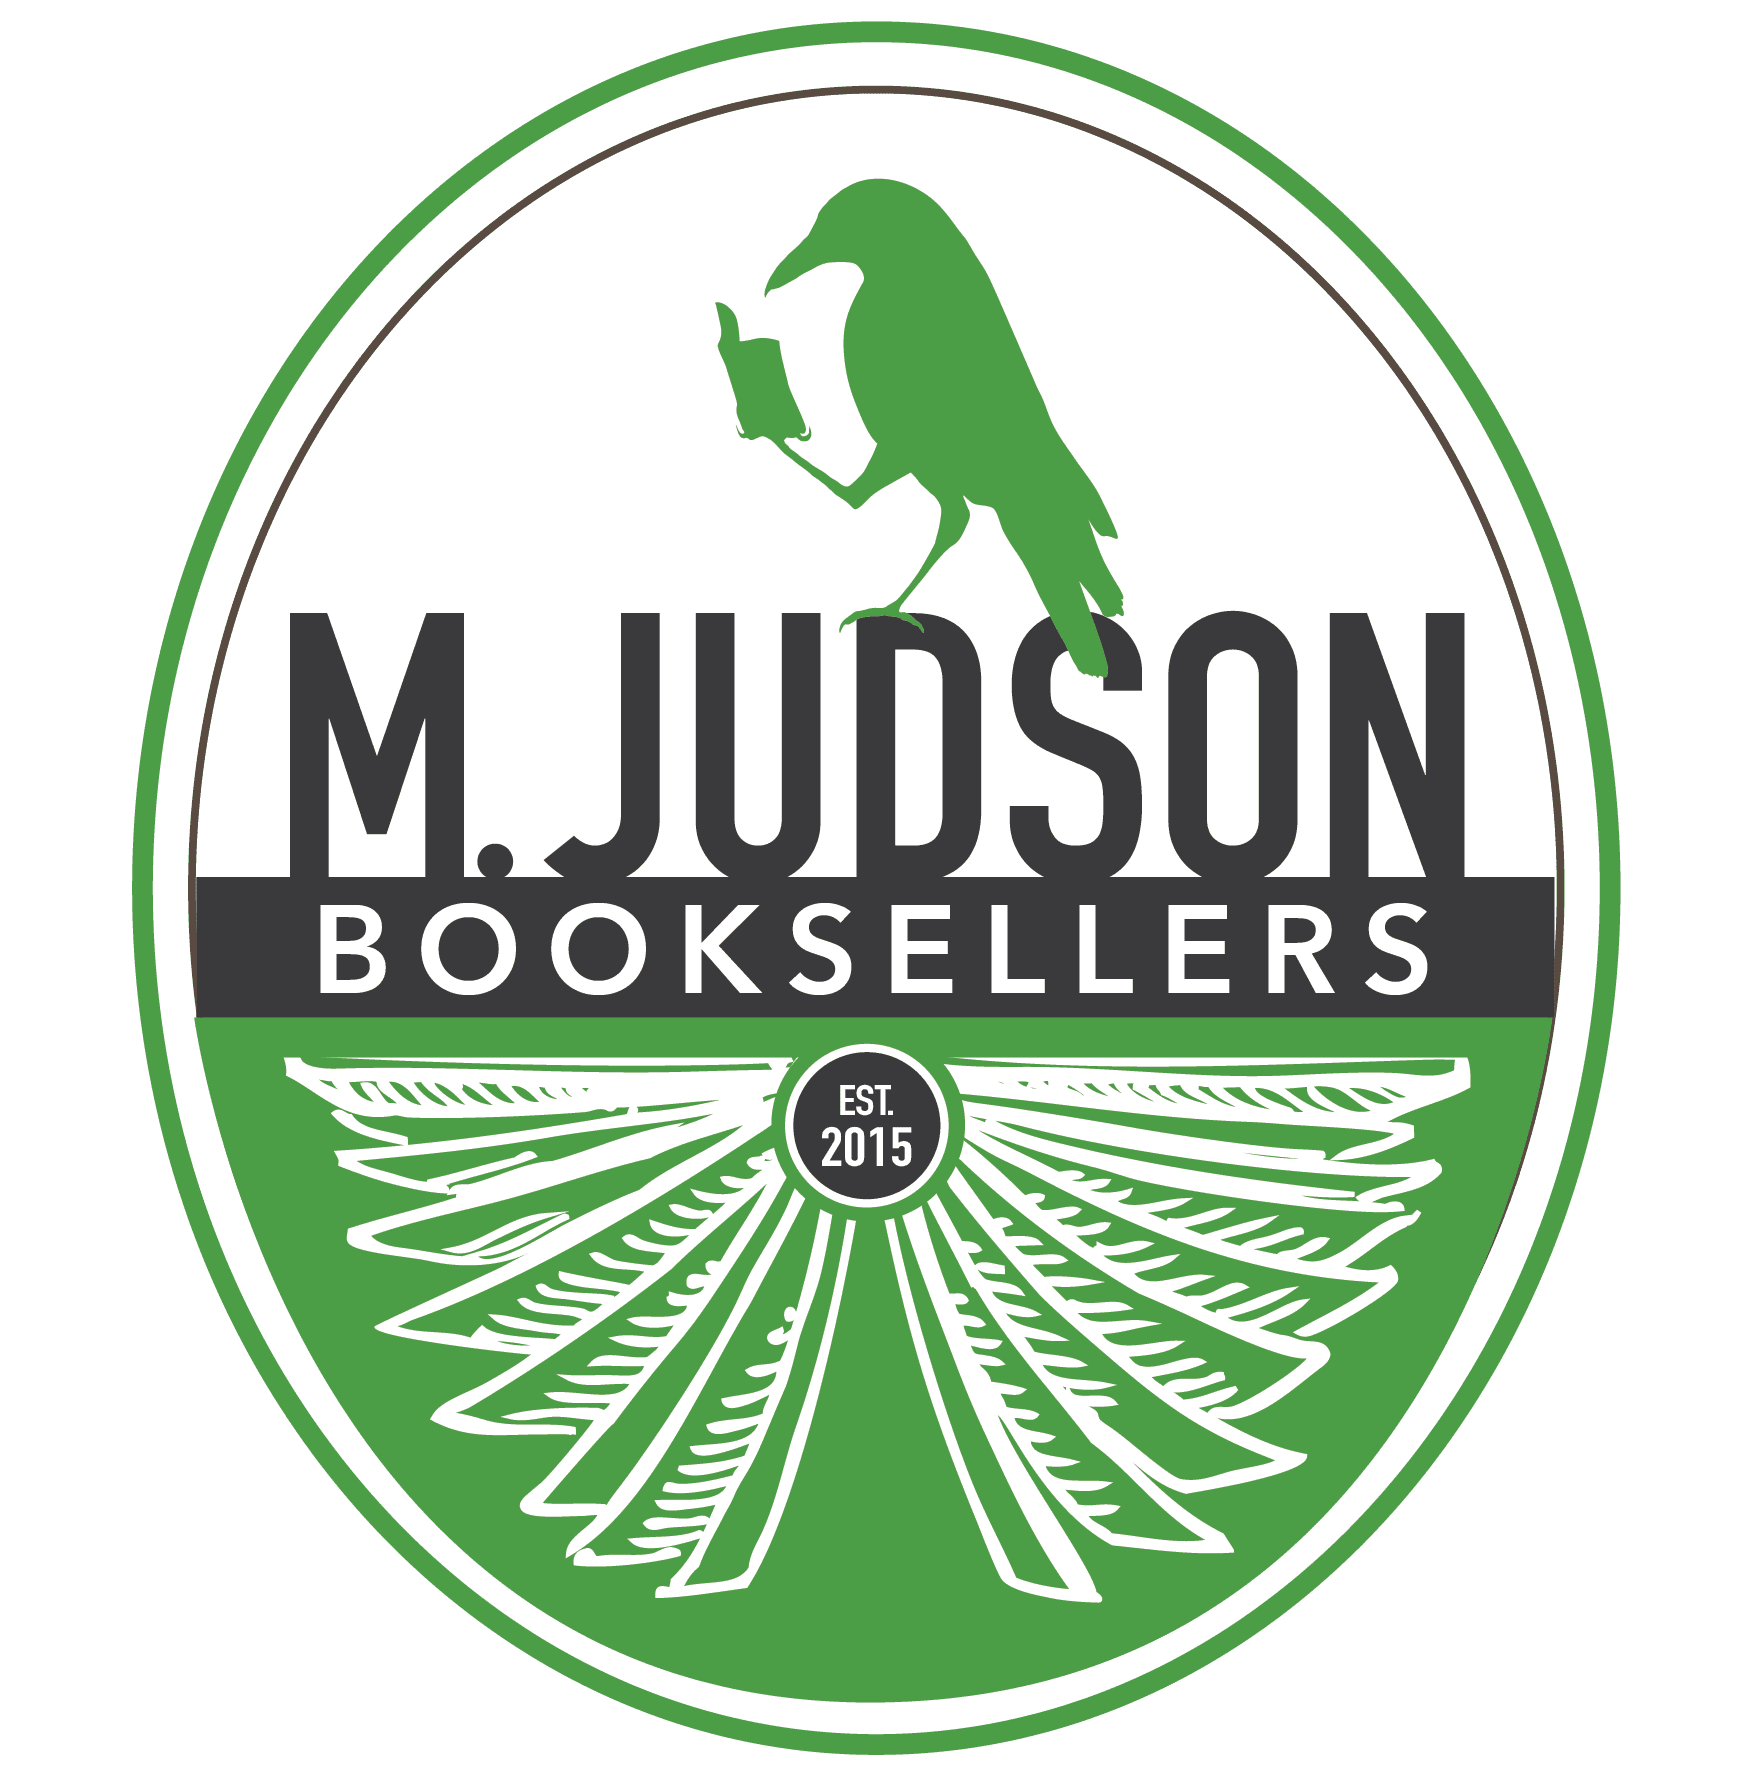 M. Judson Booksellers